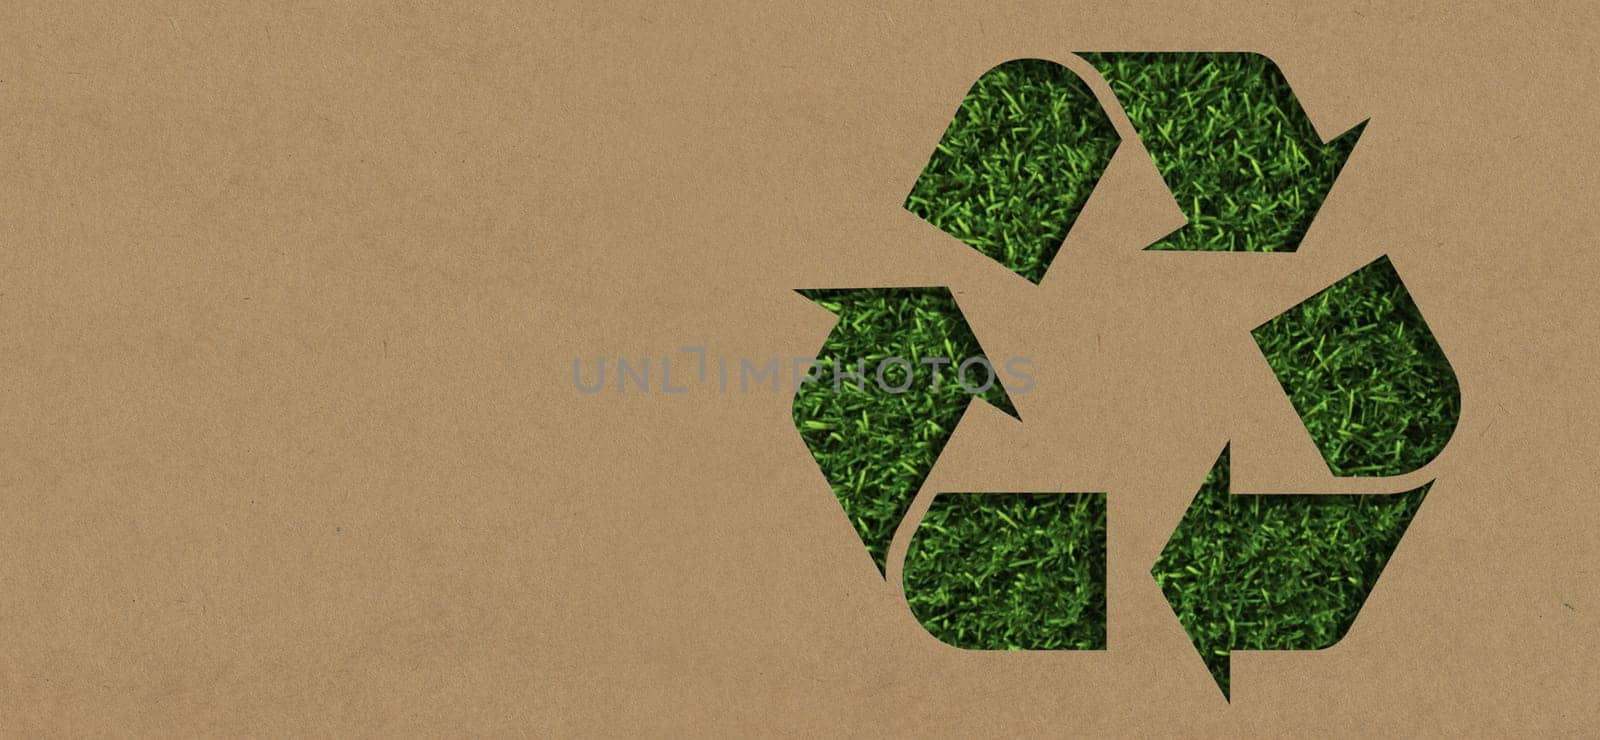 Grass, mockup and cardboard with recycle arrow for sustainability, environment and package pollution. Recycling, earth day and energy with eco friendly sign for reusable, clean energy and nature by YuriArcurs